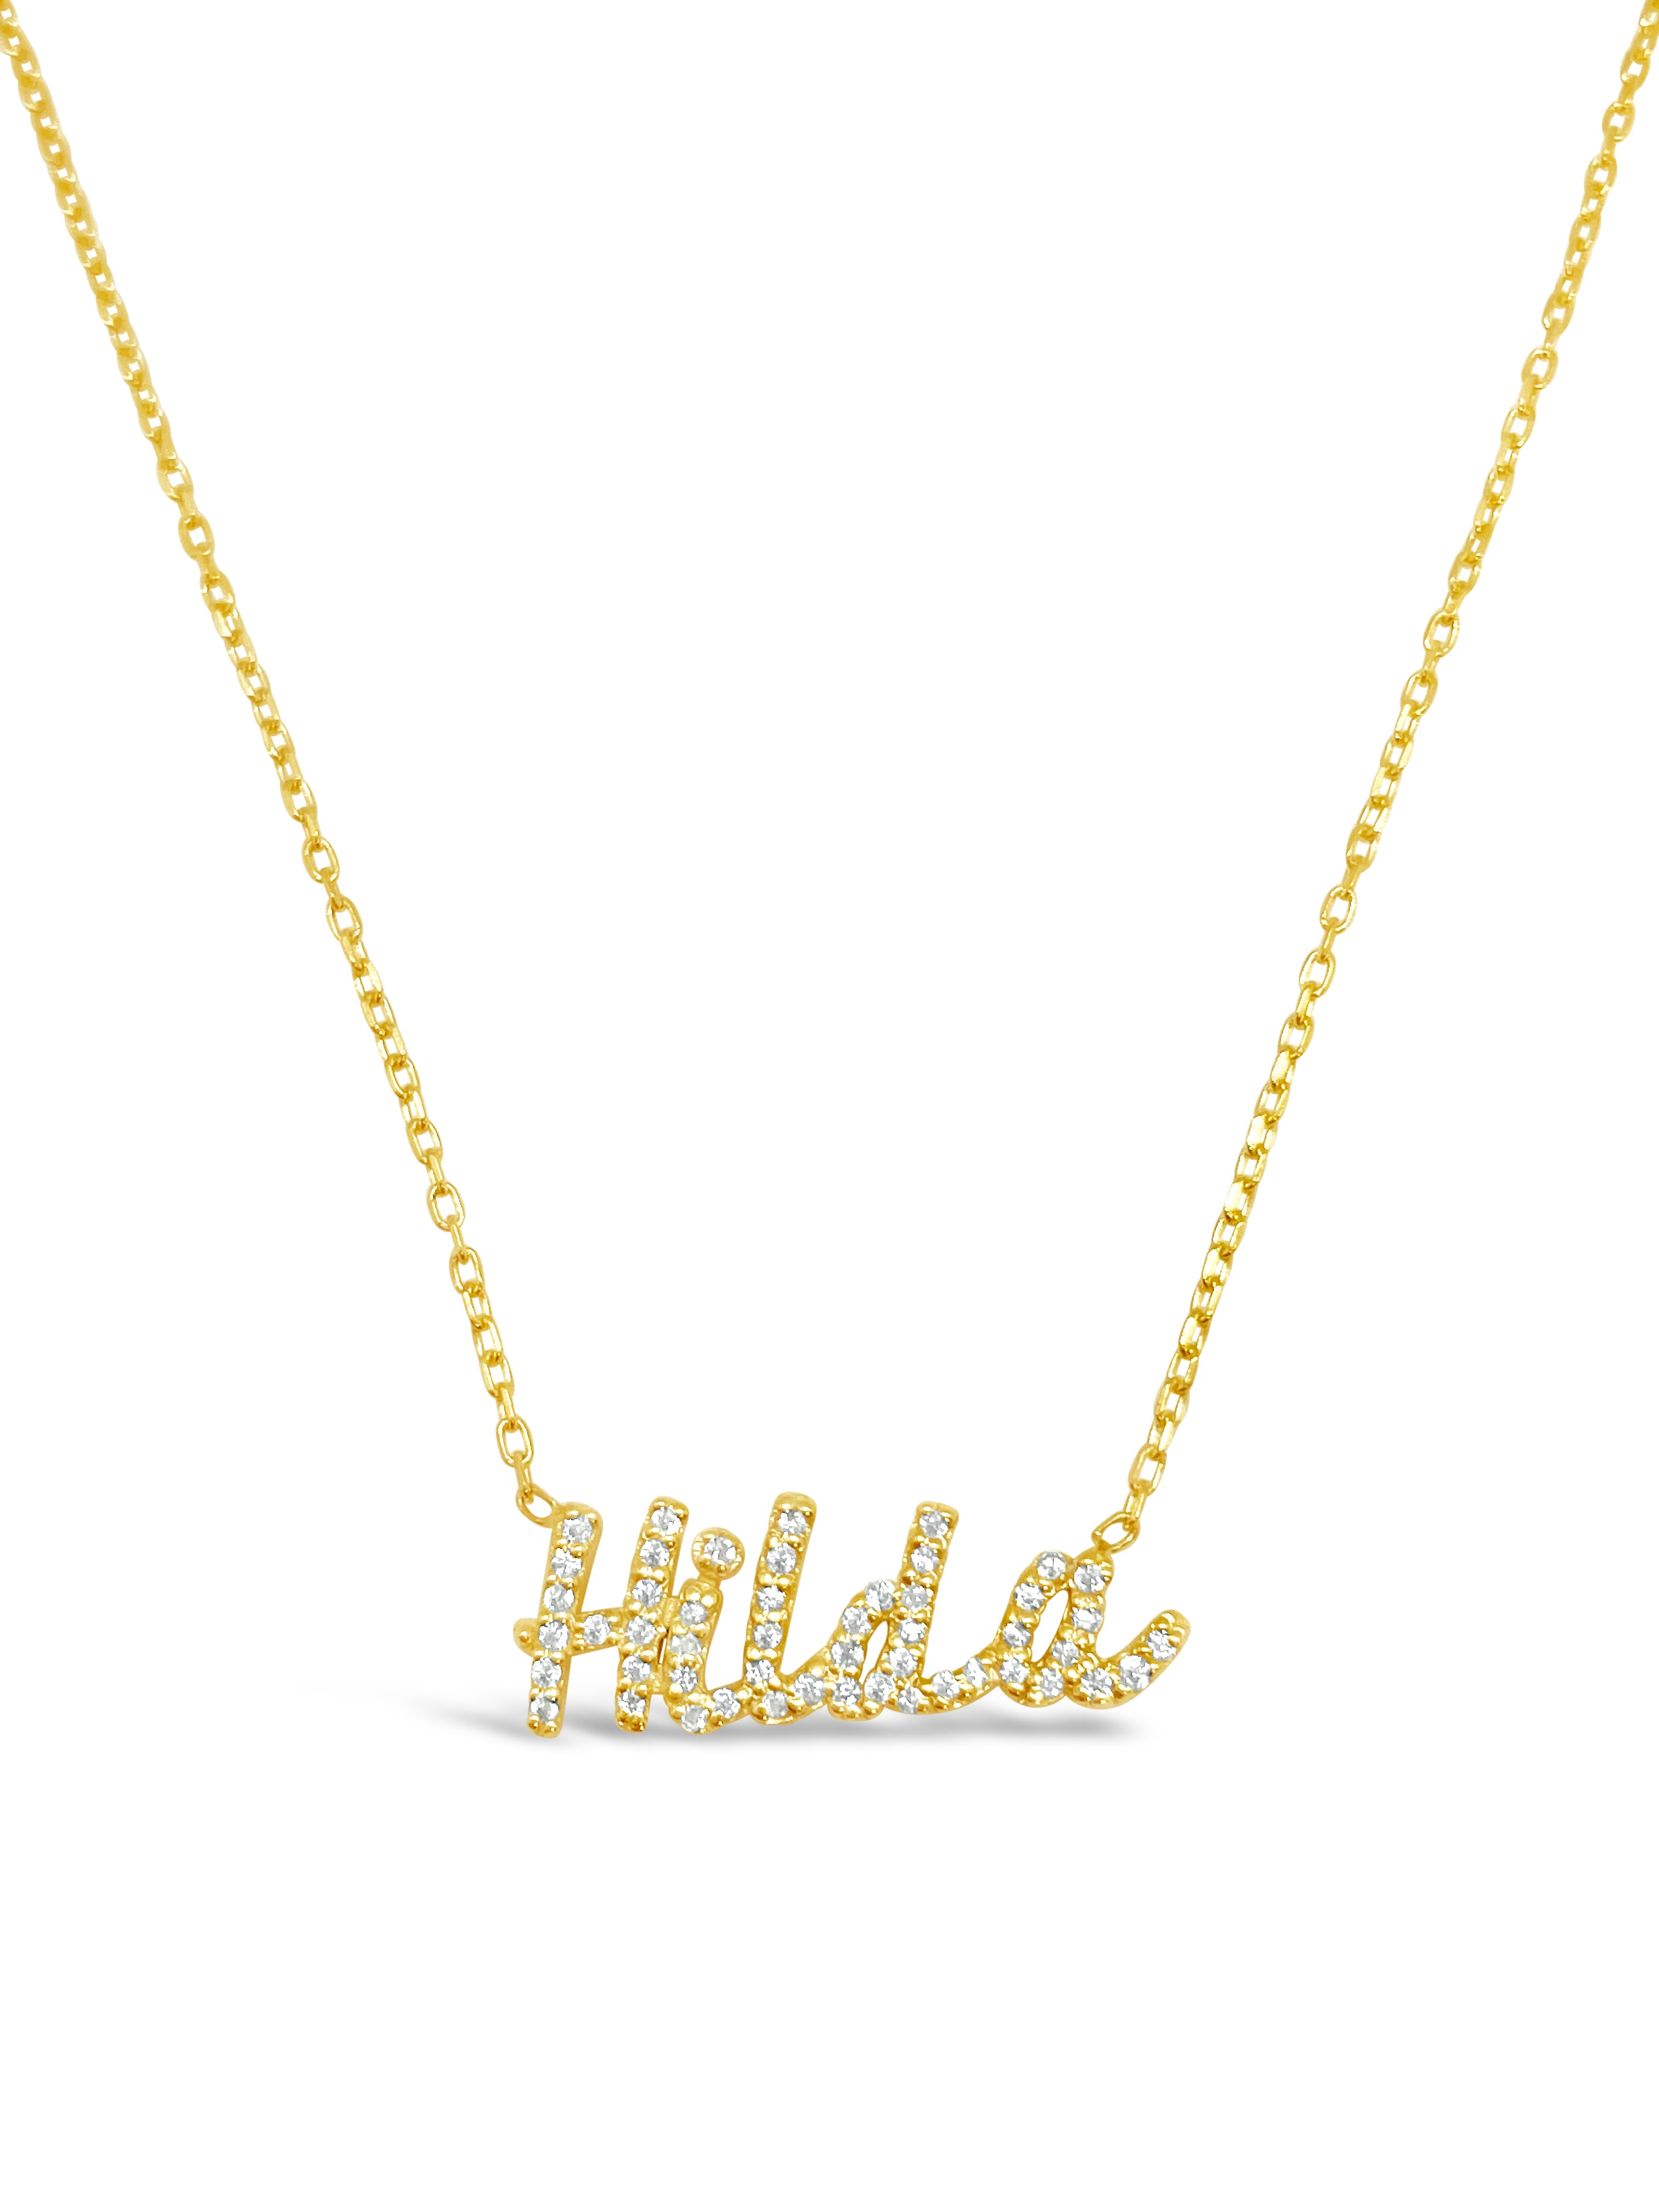 CZ name necklace